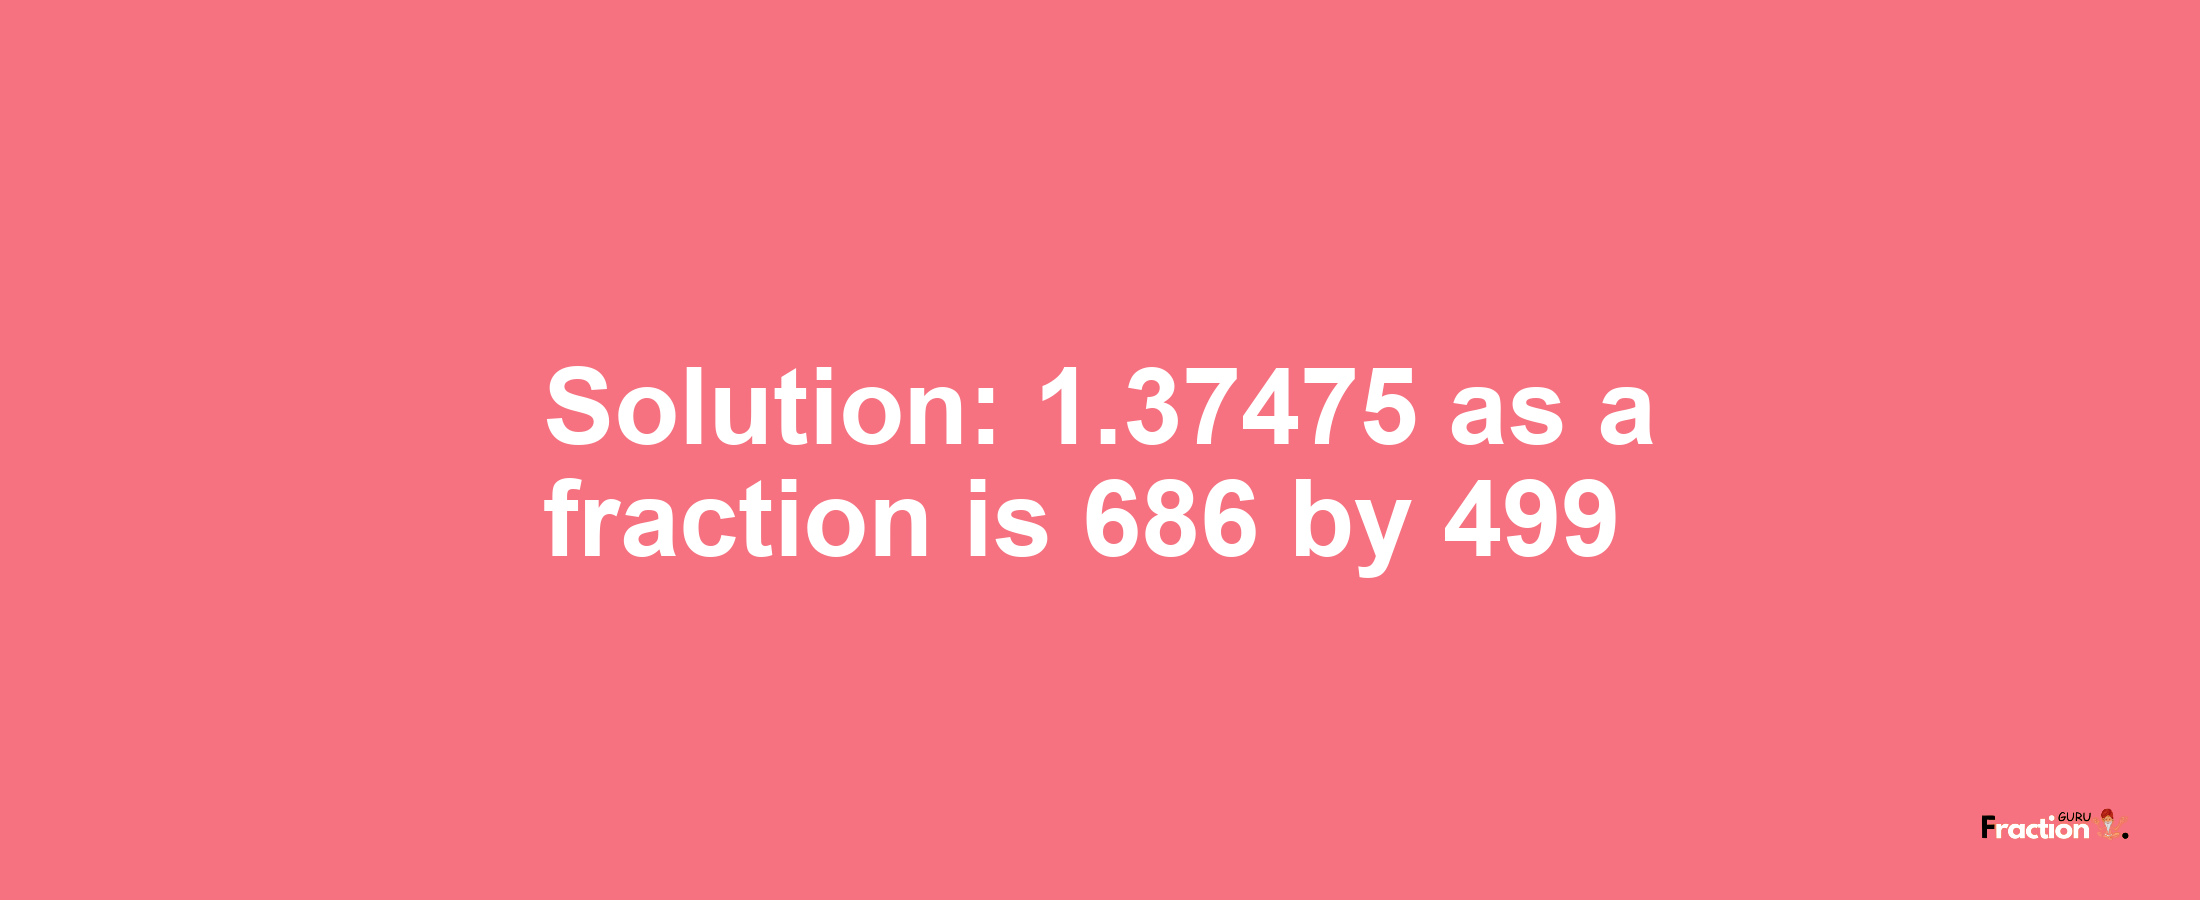 Solution:1.37475 as a fraction is 686/499